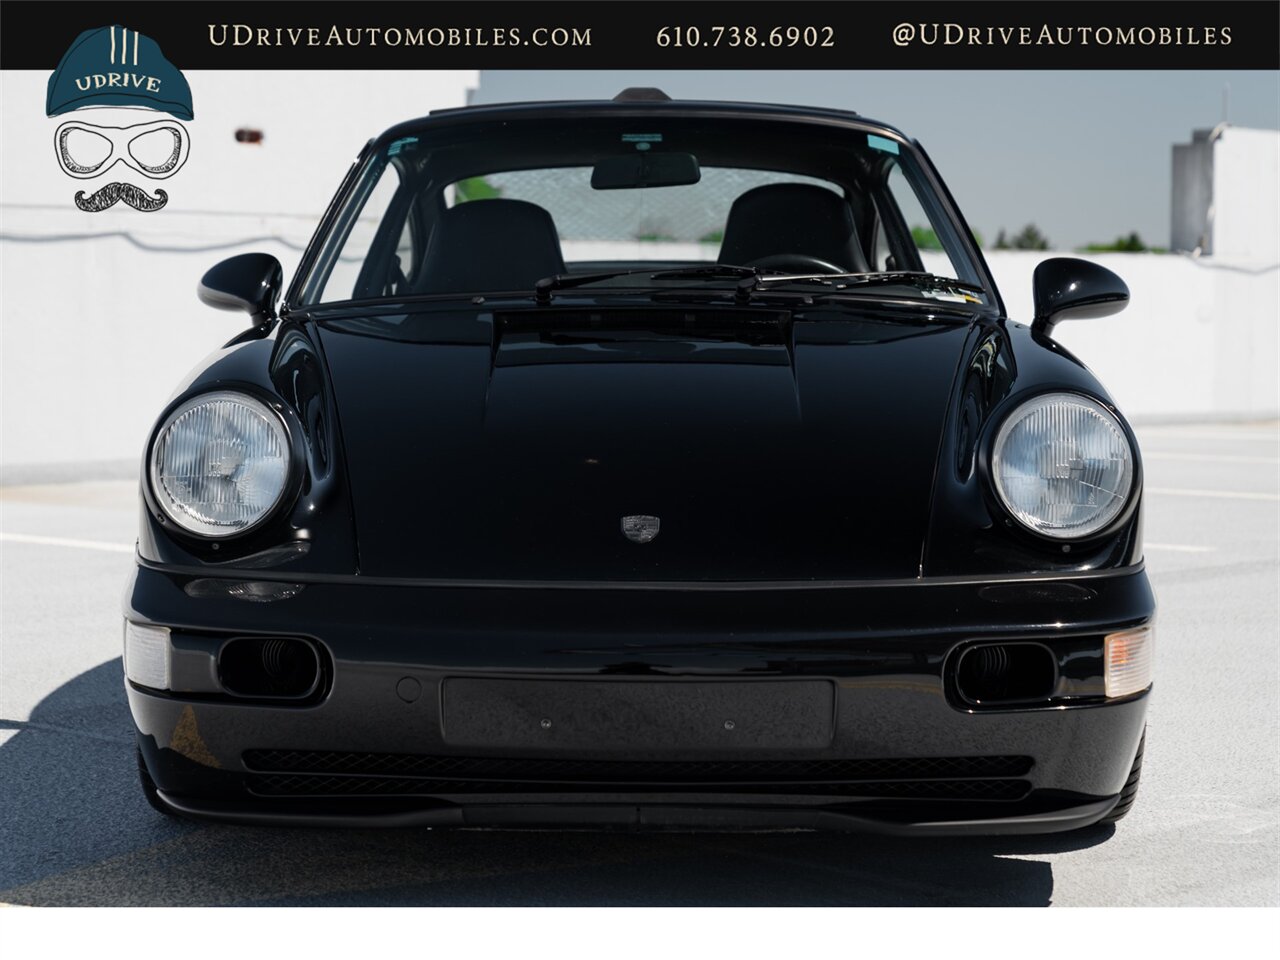 1990 Porsche 911 Carrera 2  911 964 C2 5 Speed Over $53k in Recent Service and Upgrades Spectacular - Photo 11 - West Chester, PA 19382